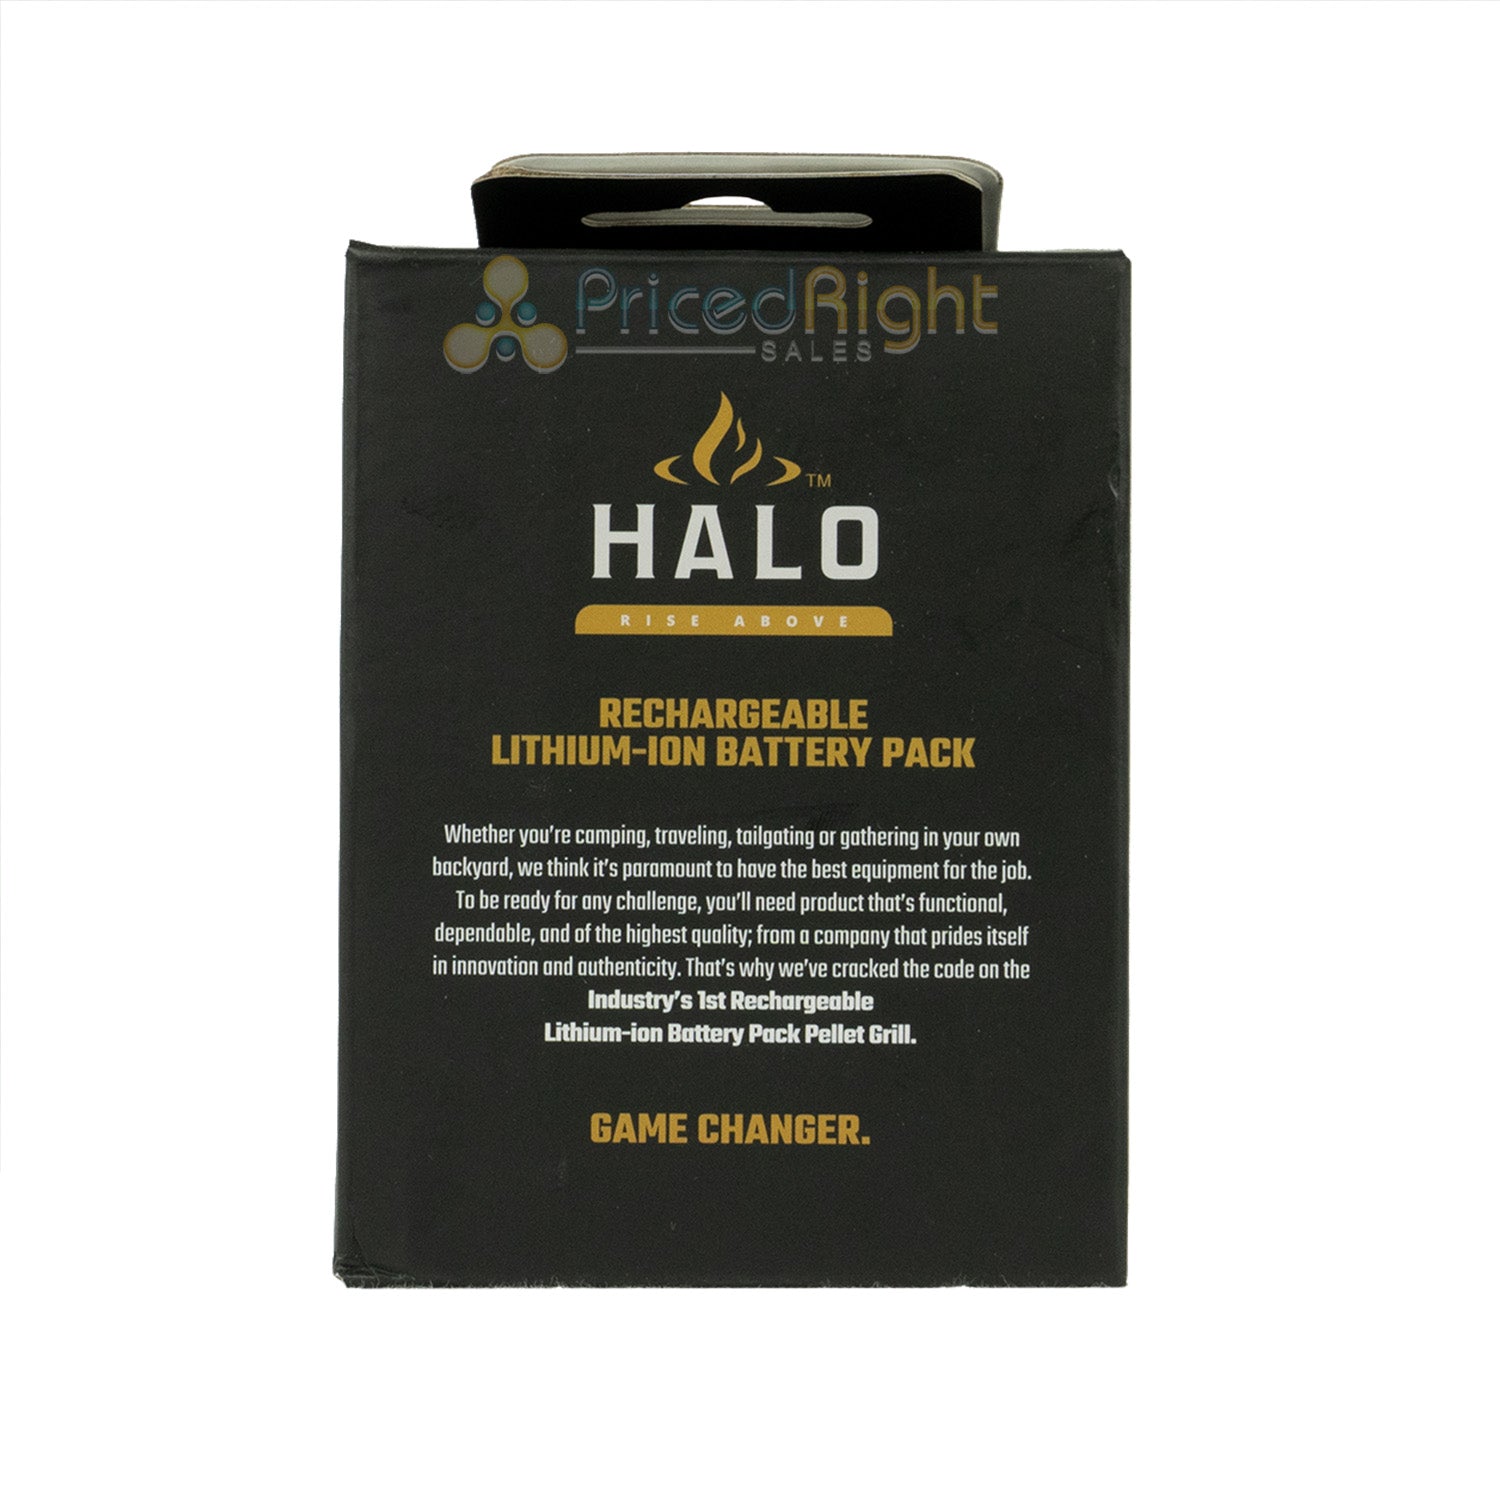 Halo Universal Lithium-Ion Rechargeable Battery Pack Single Battery HS-2001-A